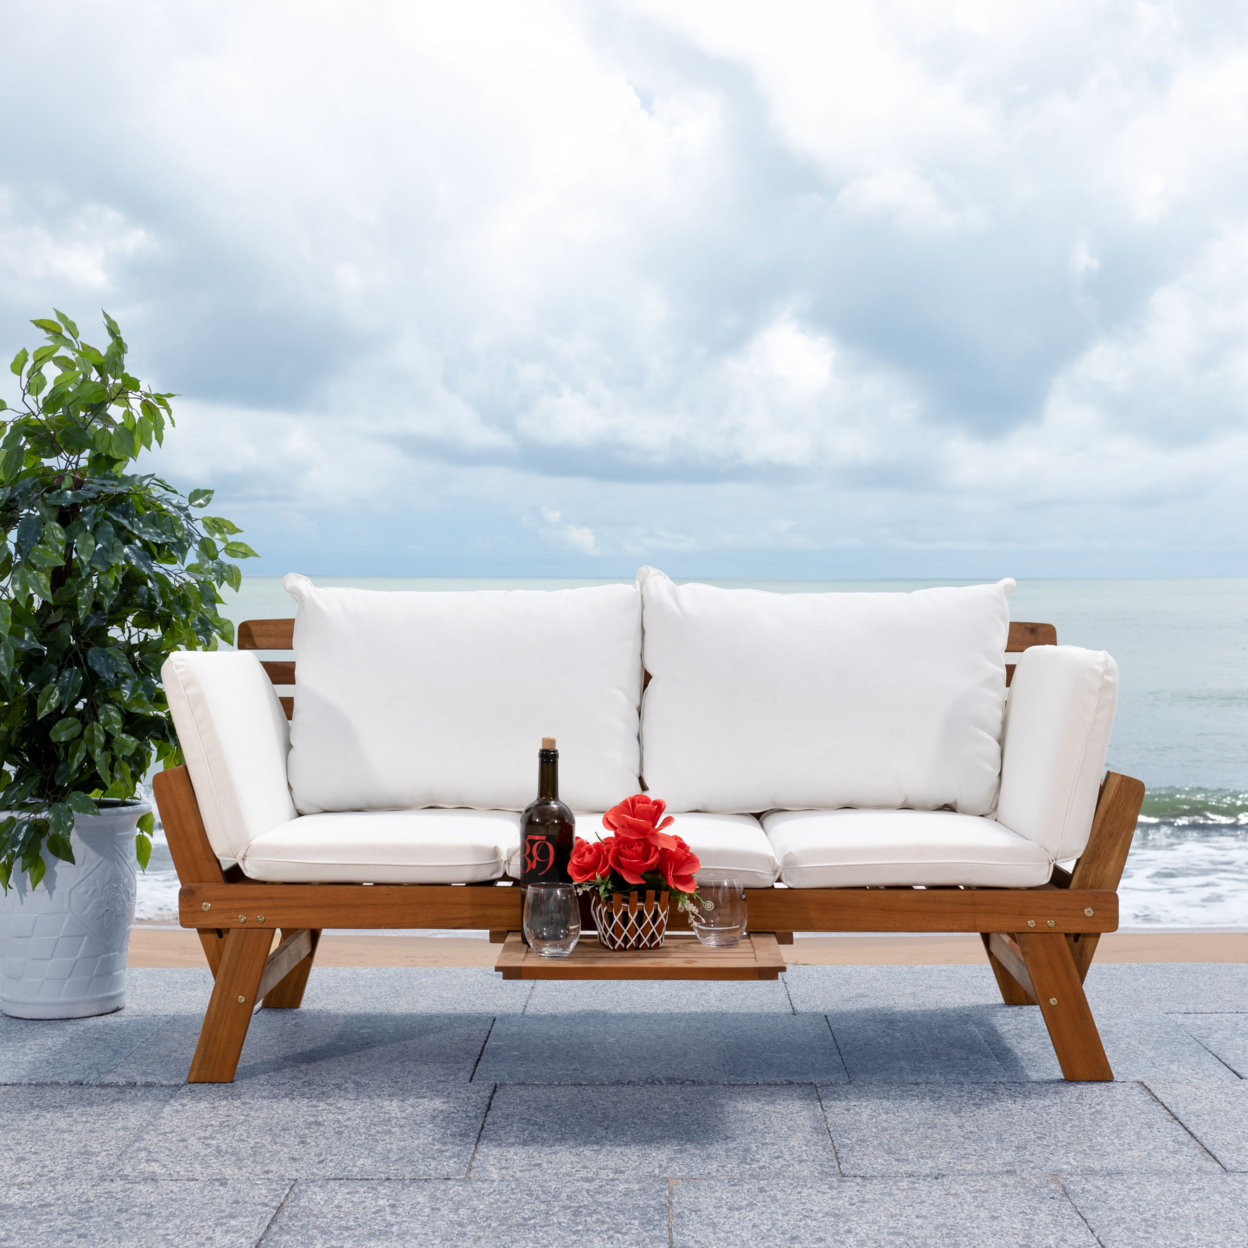 SAFAVIEH Outdoor Collection Emely Outdoor Daybed Natural / Beige